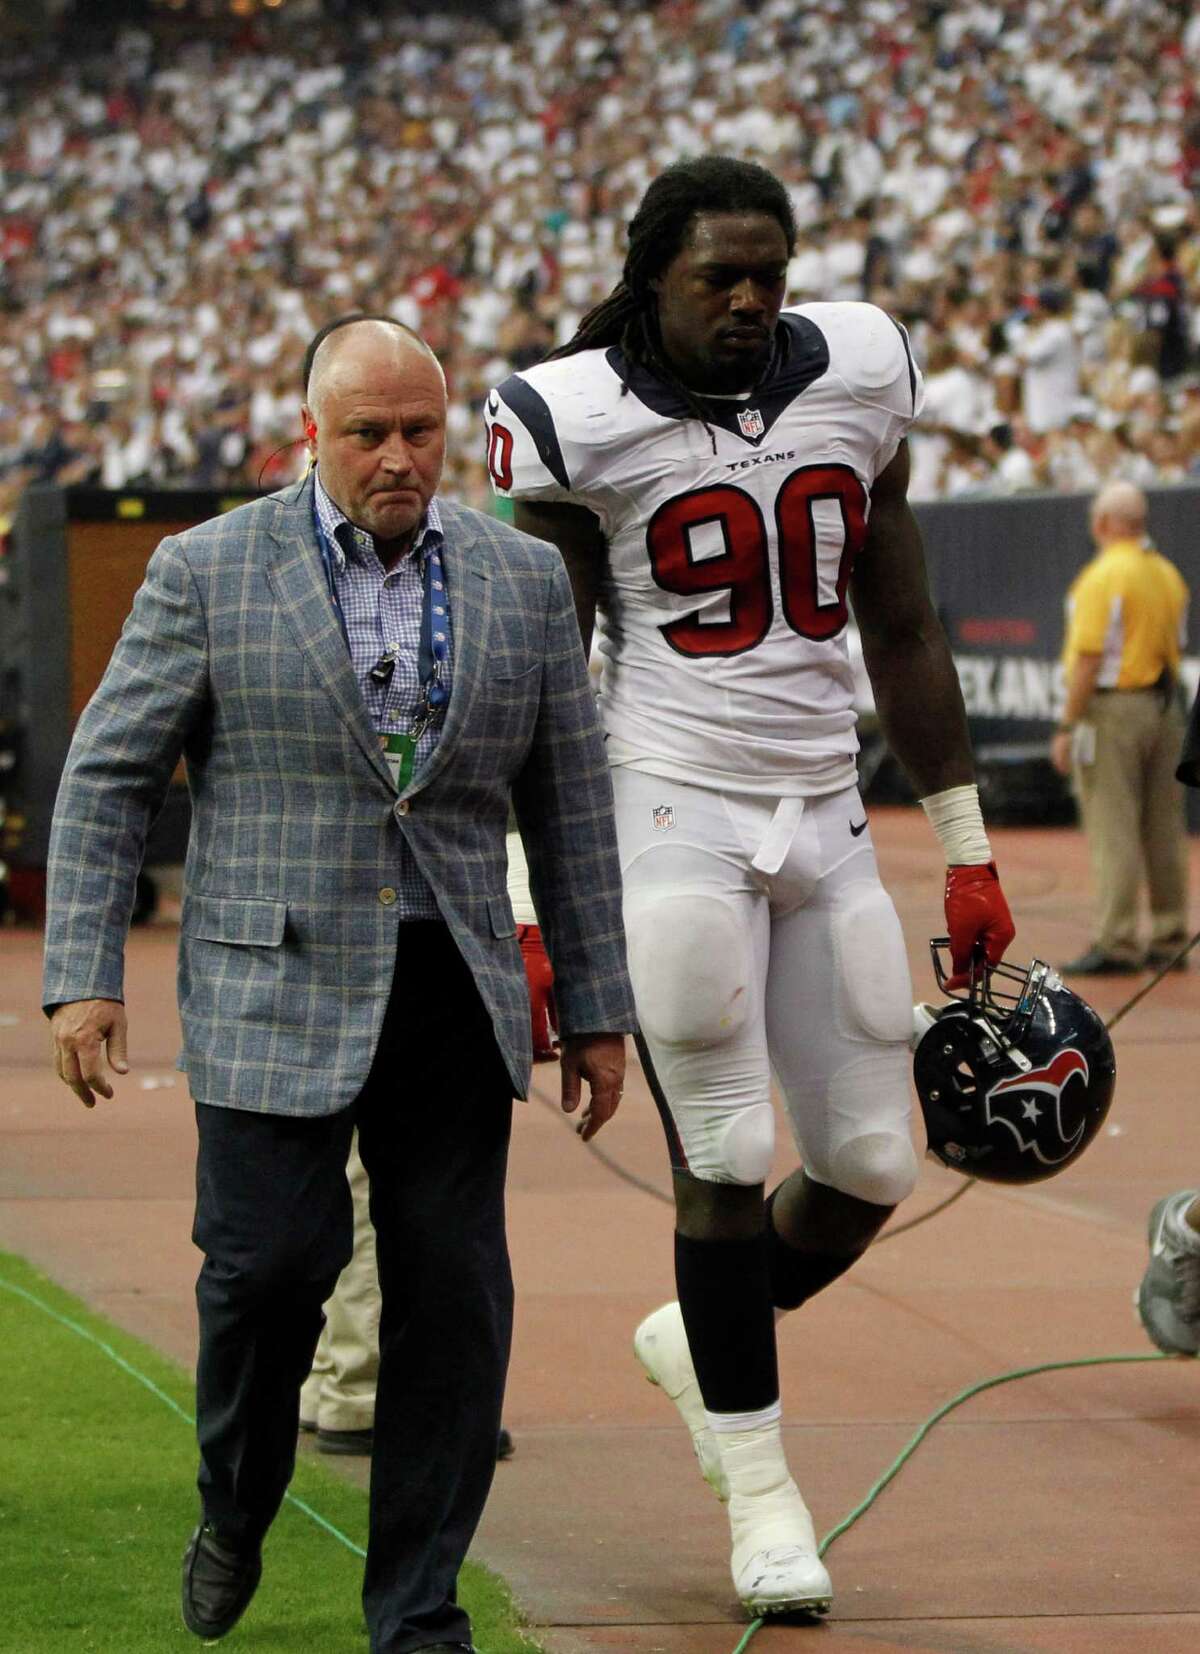 Putting a damper on the opening win was news that the injury that forced top pick Jadeveon Clowney to depart early is a torn meniscus cartilage that will sideline him for four to six weeks.